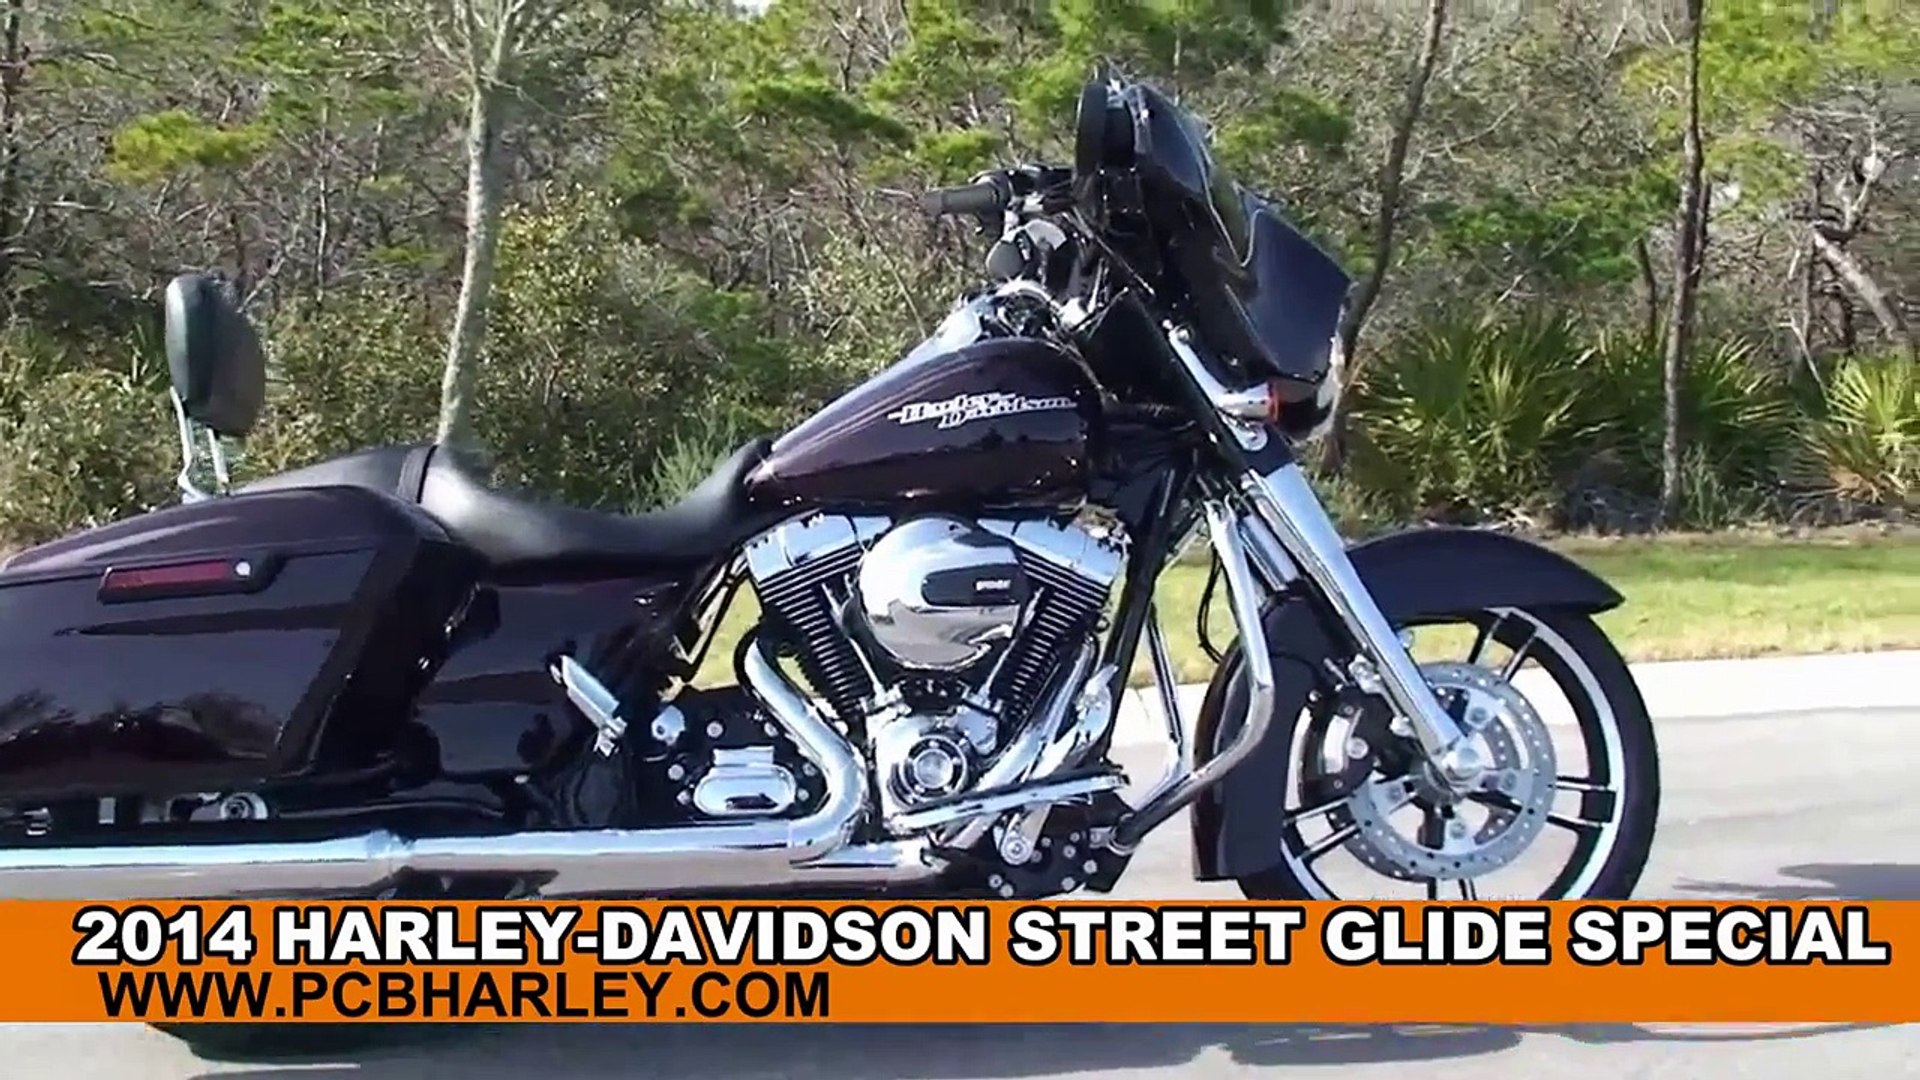 2014 Harley Davidson Street Glide Special Motorcycles for Sale in Pensacola FL